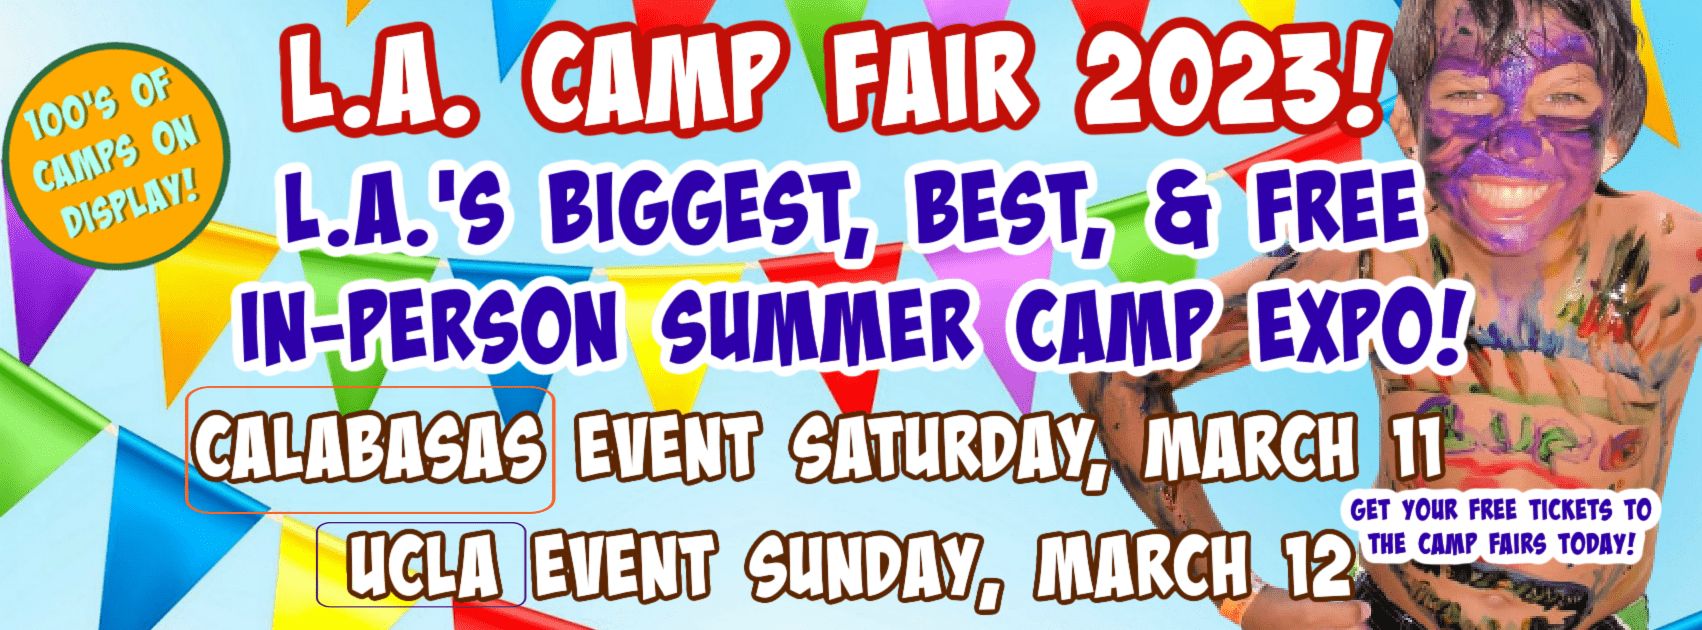 L.A. Camp Fair 2023 in Calabasas and at UCLA promotional banner.